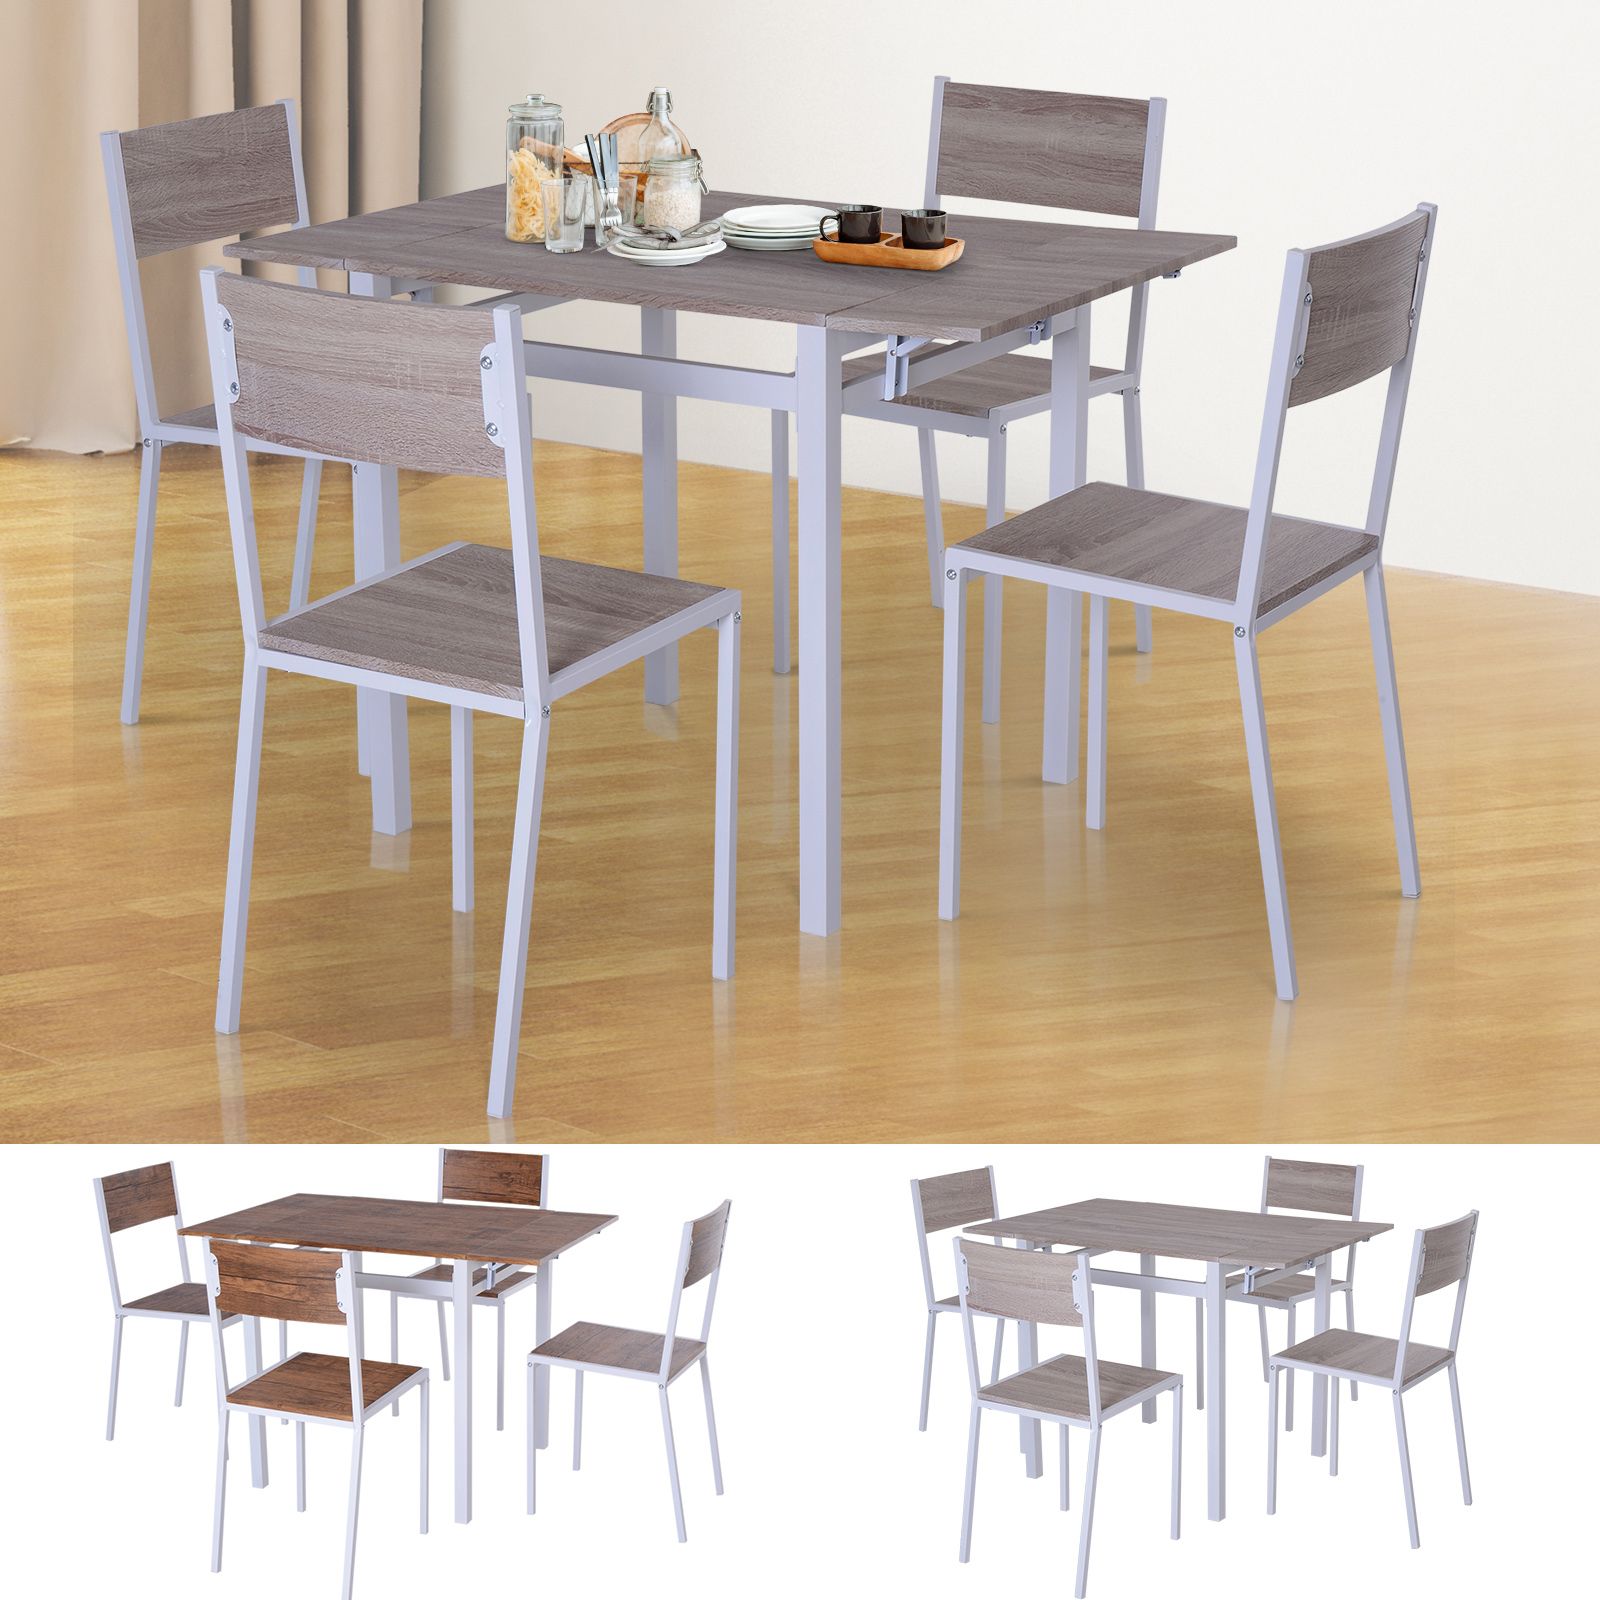 Wood Kitchen Dining Tables With Removable Center Leaf For Well Liked Details About 5 Pc Extending Drop Leaf Counter Height Dining Set Table & 4  Chairs Kitchen (View 22 of 25)